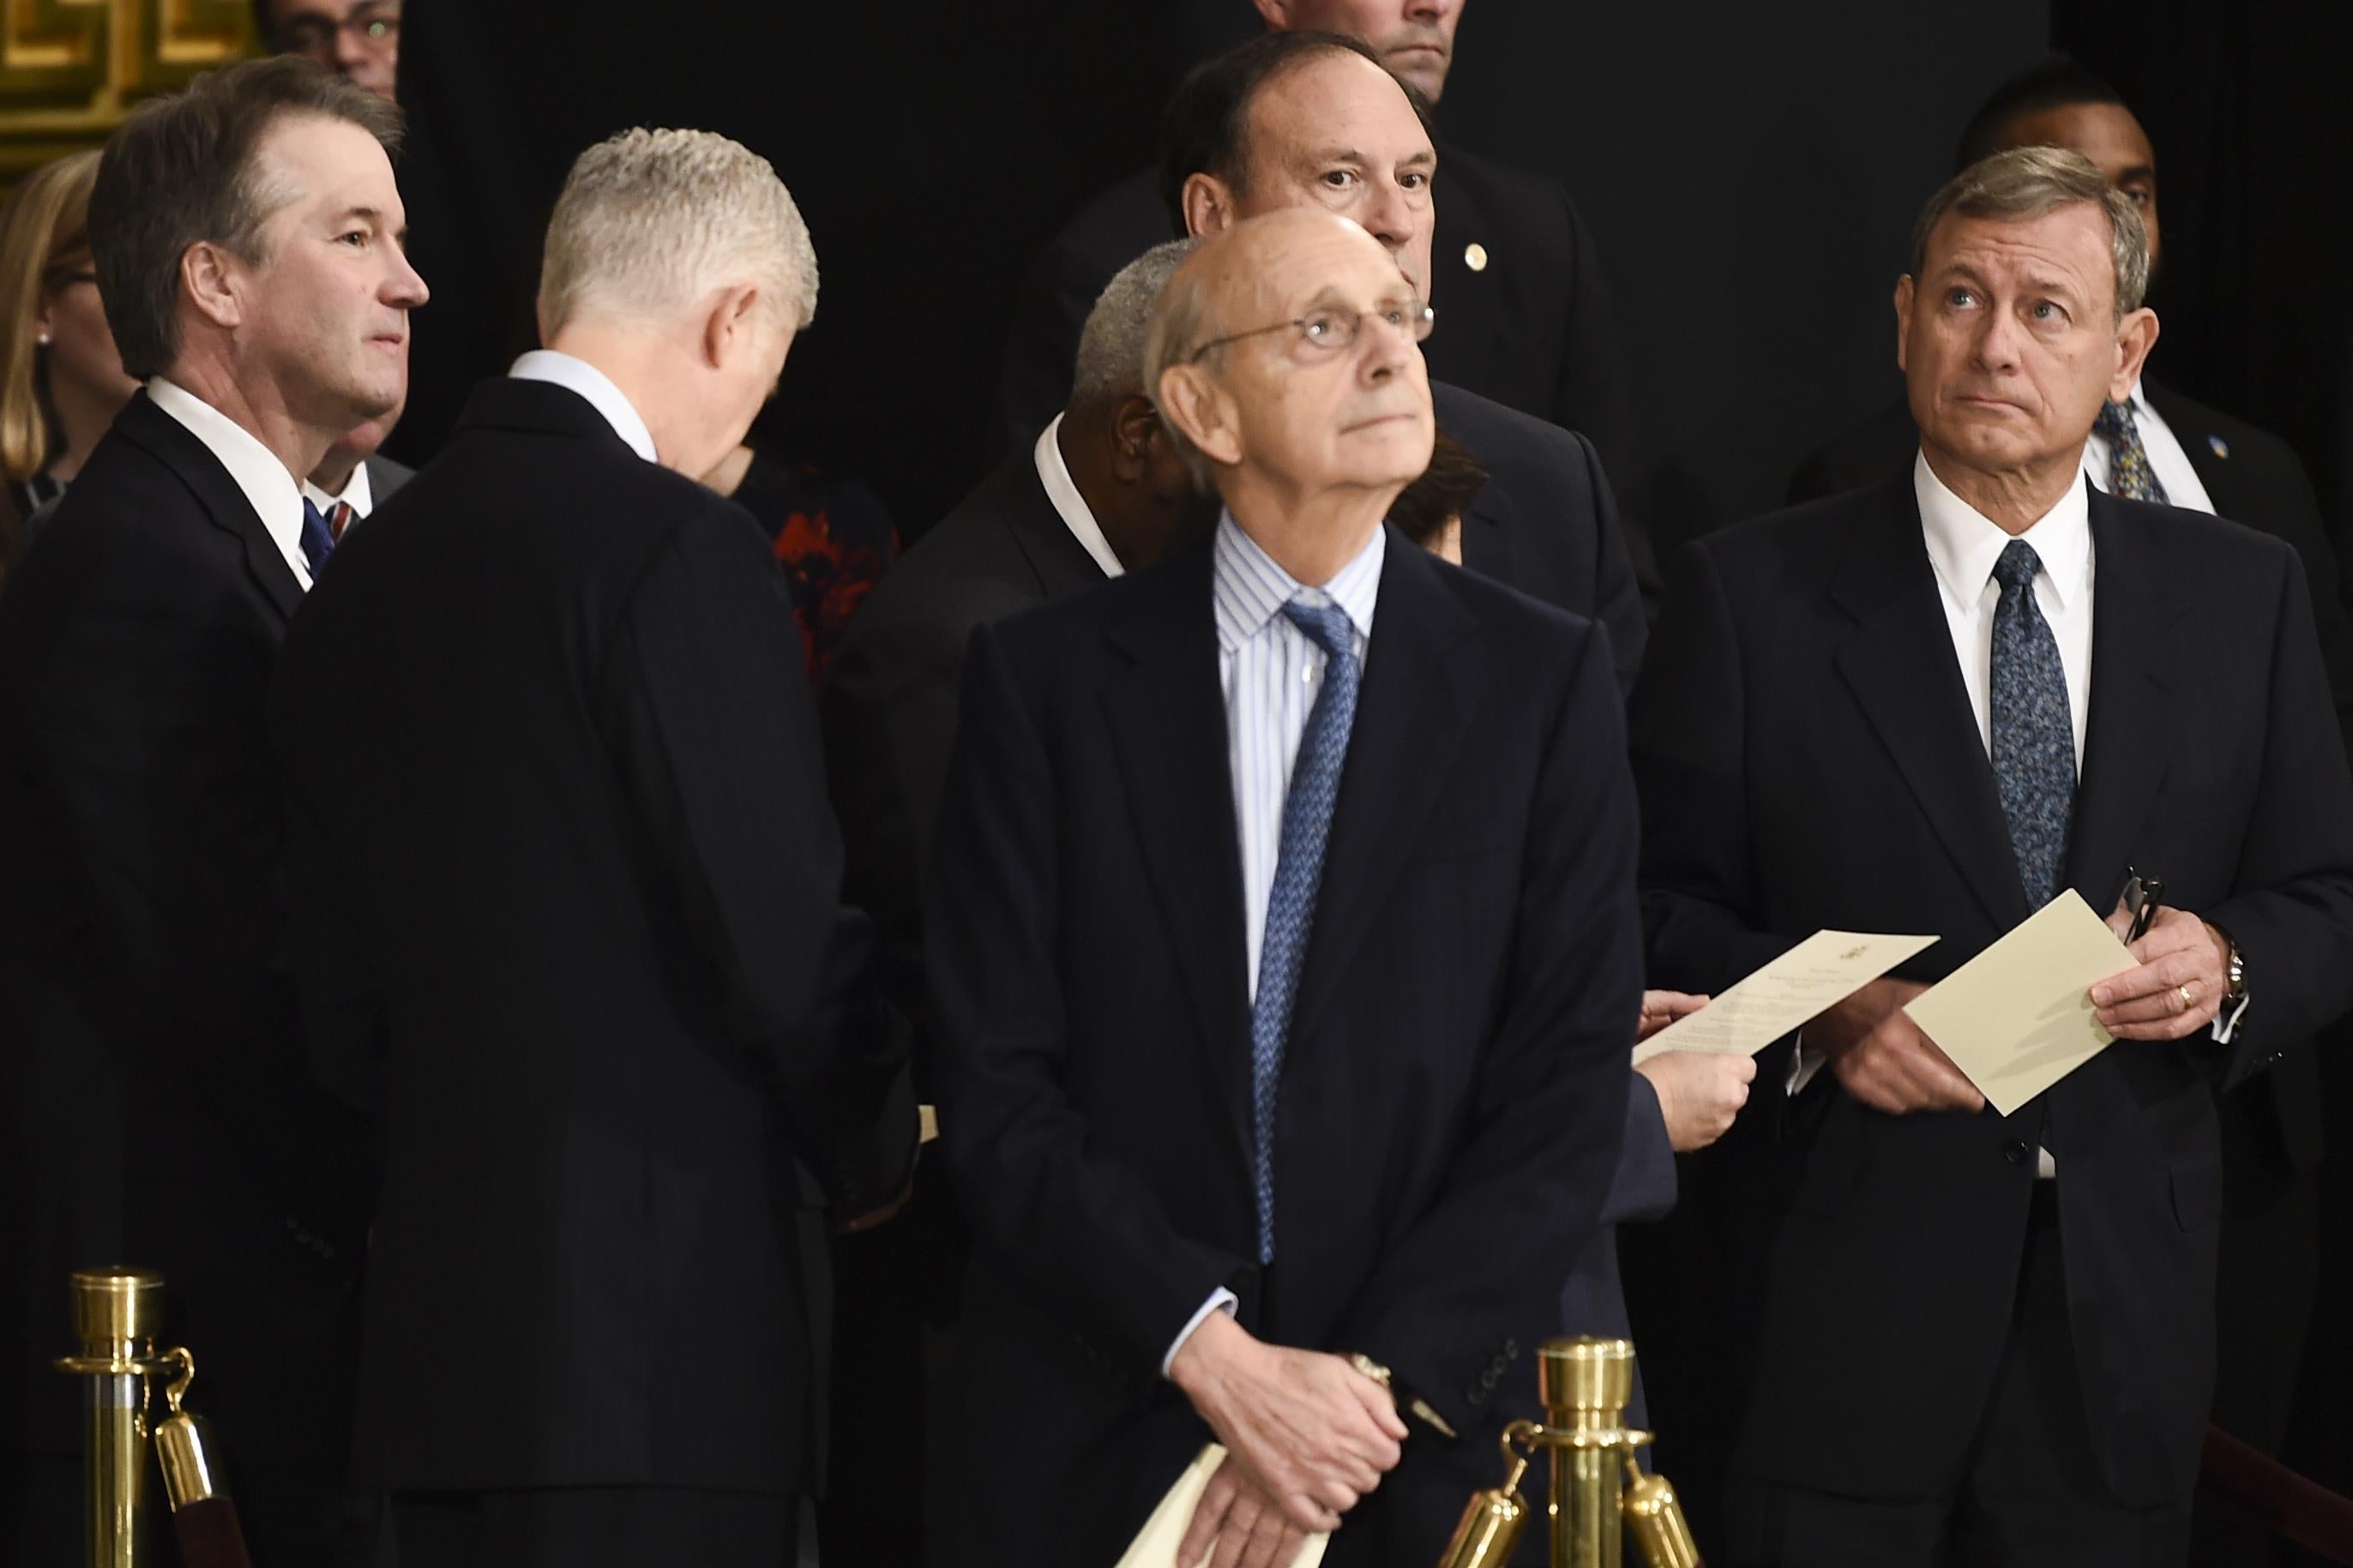 Members of the Supreme Court Brett Kavanaugh (L), Neil Gorsuch (2L), Stephen Breyer, and John Roberts (R) wait for the casket containing the remains of former US President George H.W. Bush to arrive at the U.S Capitol Rotunda on December 03, 2018 in Washington, DC.